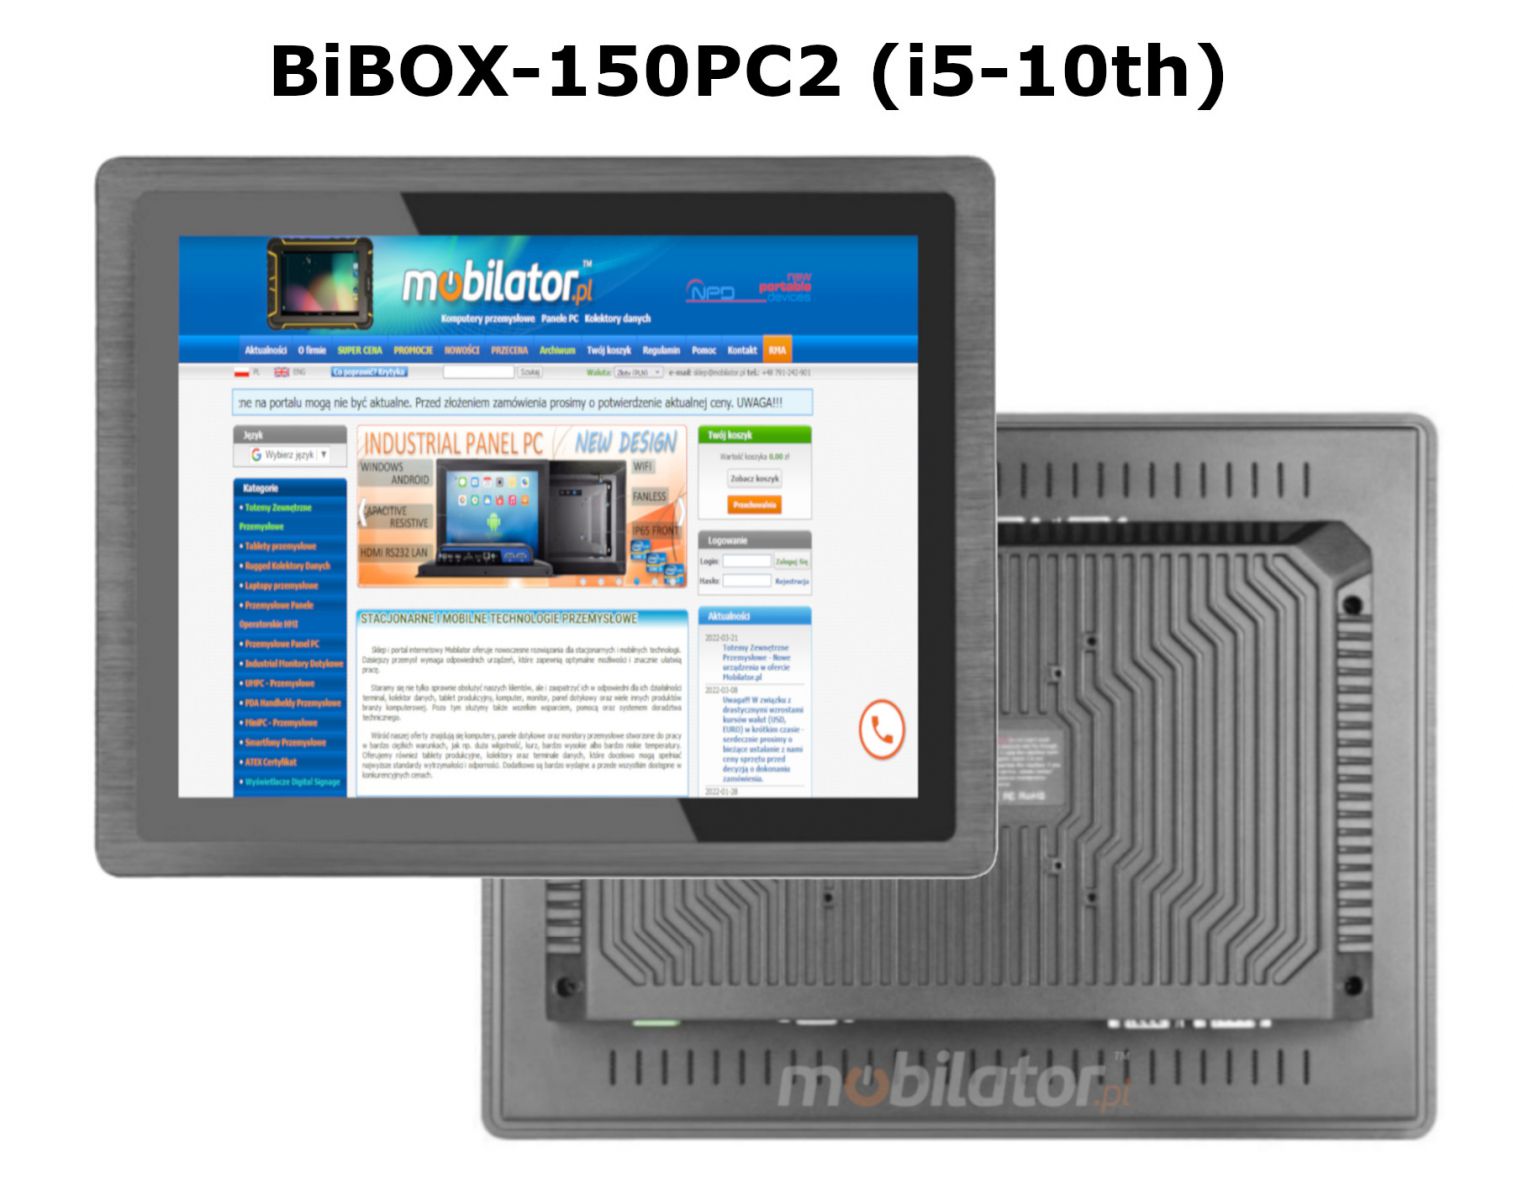 BIBOX-150PC2 spacious and industrial PC panel with WiFi, Bluetooth and 512GB SSD and 8GB RAM